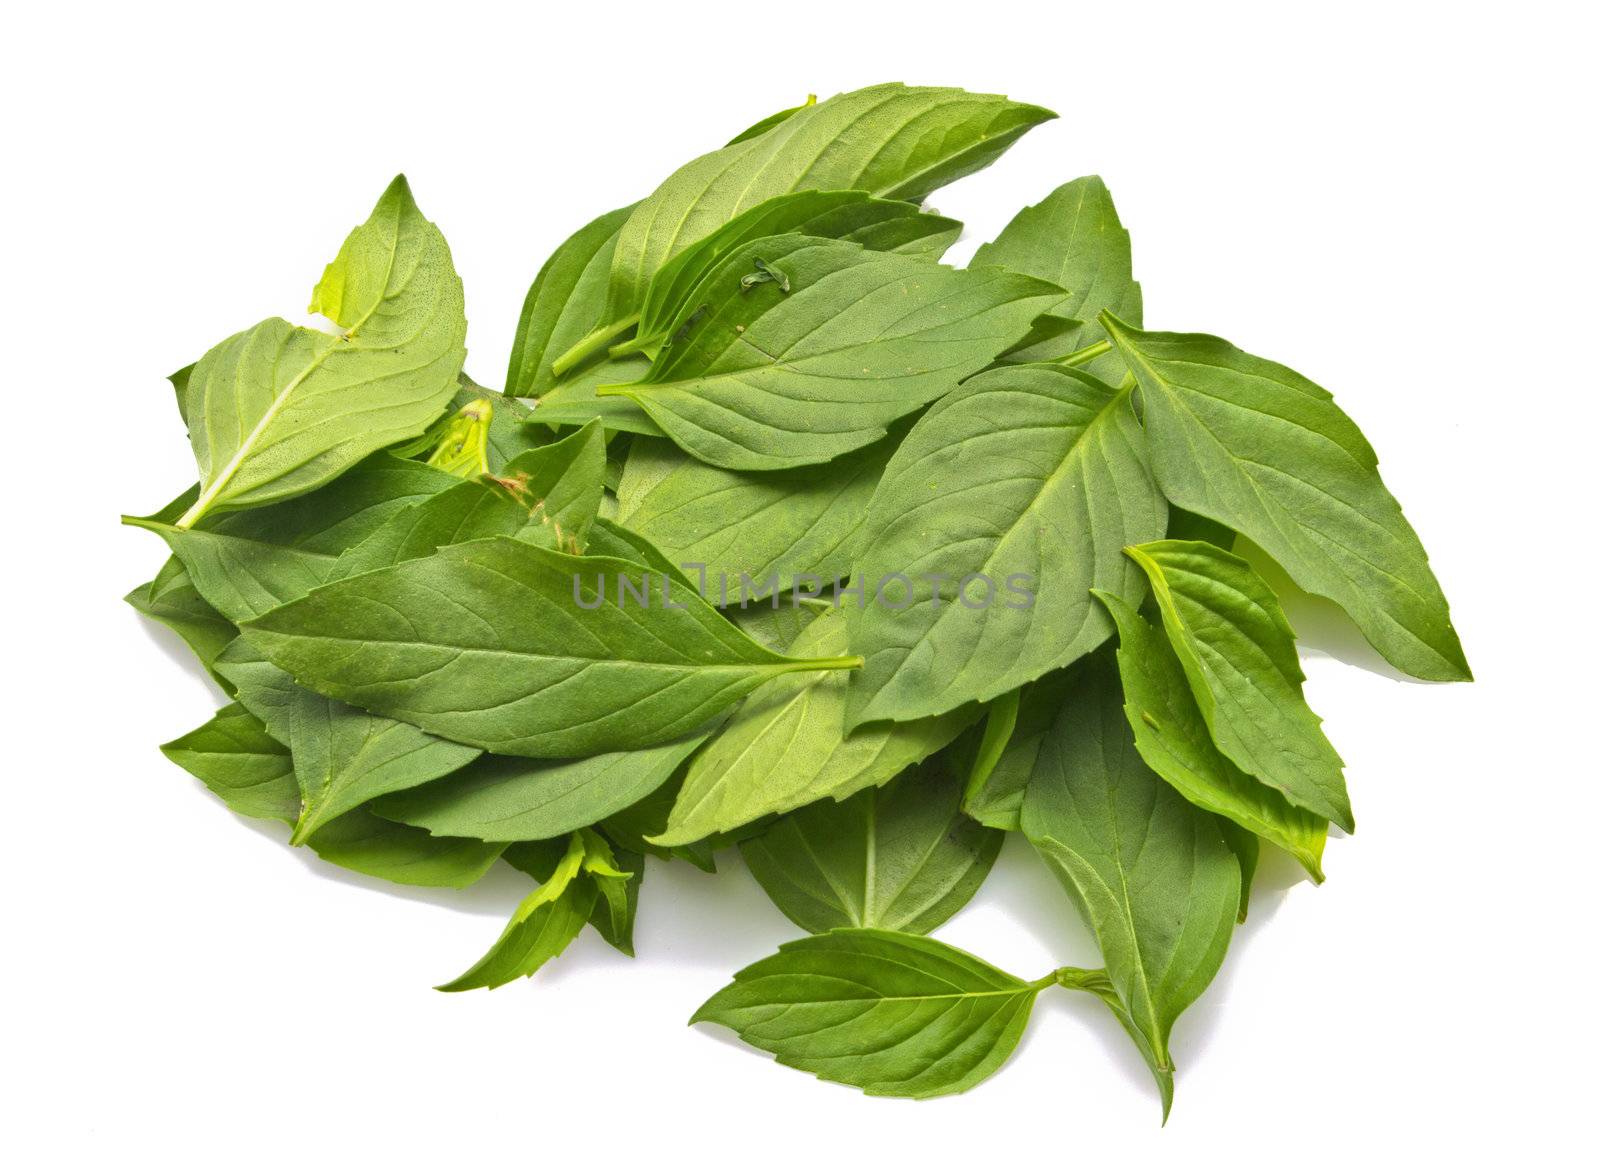 Fresh basil leaves on a white background by kurapy